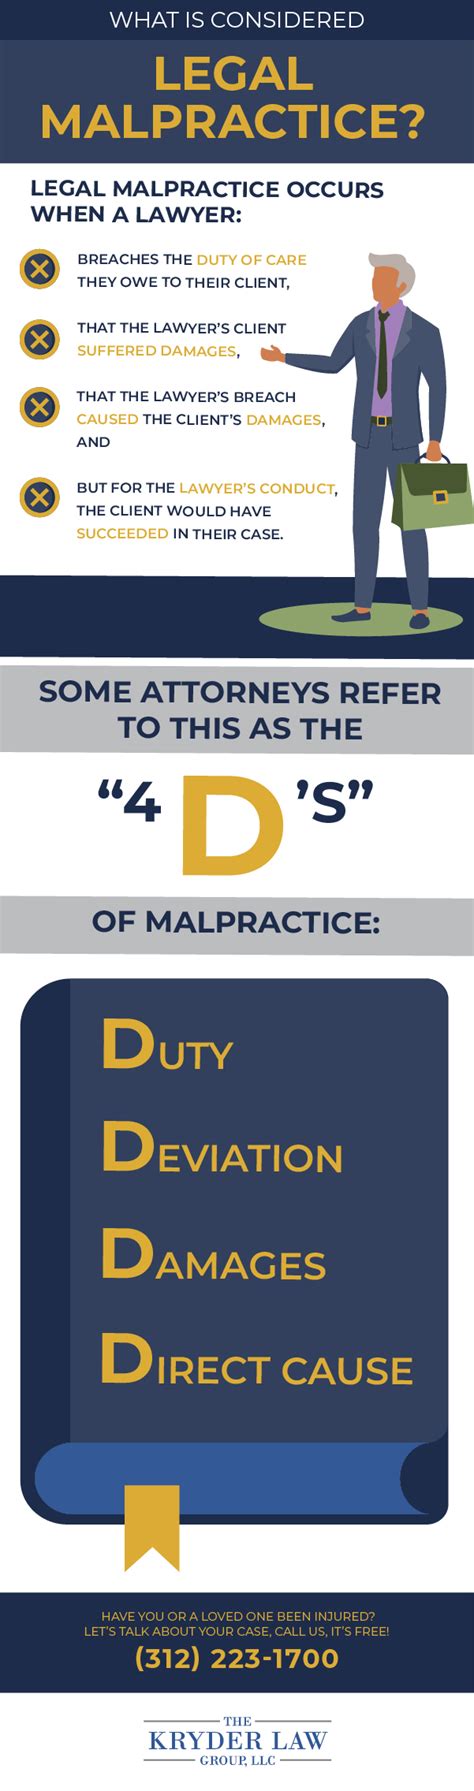 What Is Considered Malpractice For An Attorney The Kryder Law Group